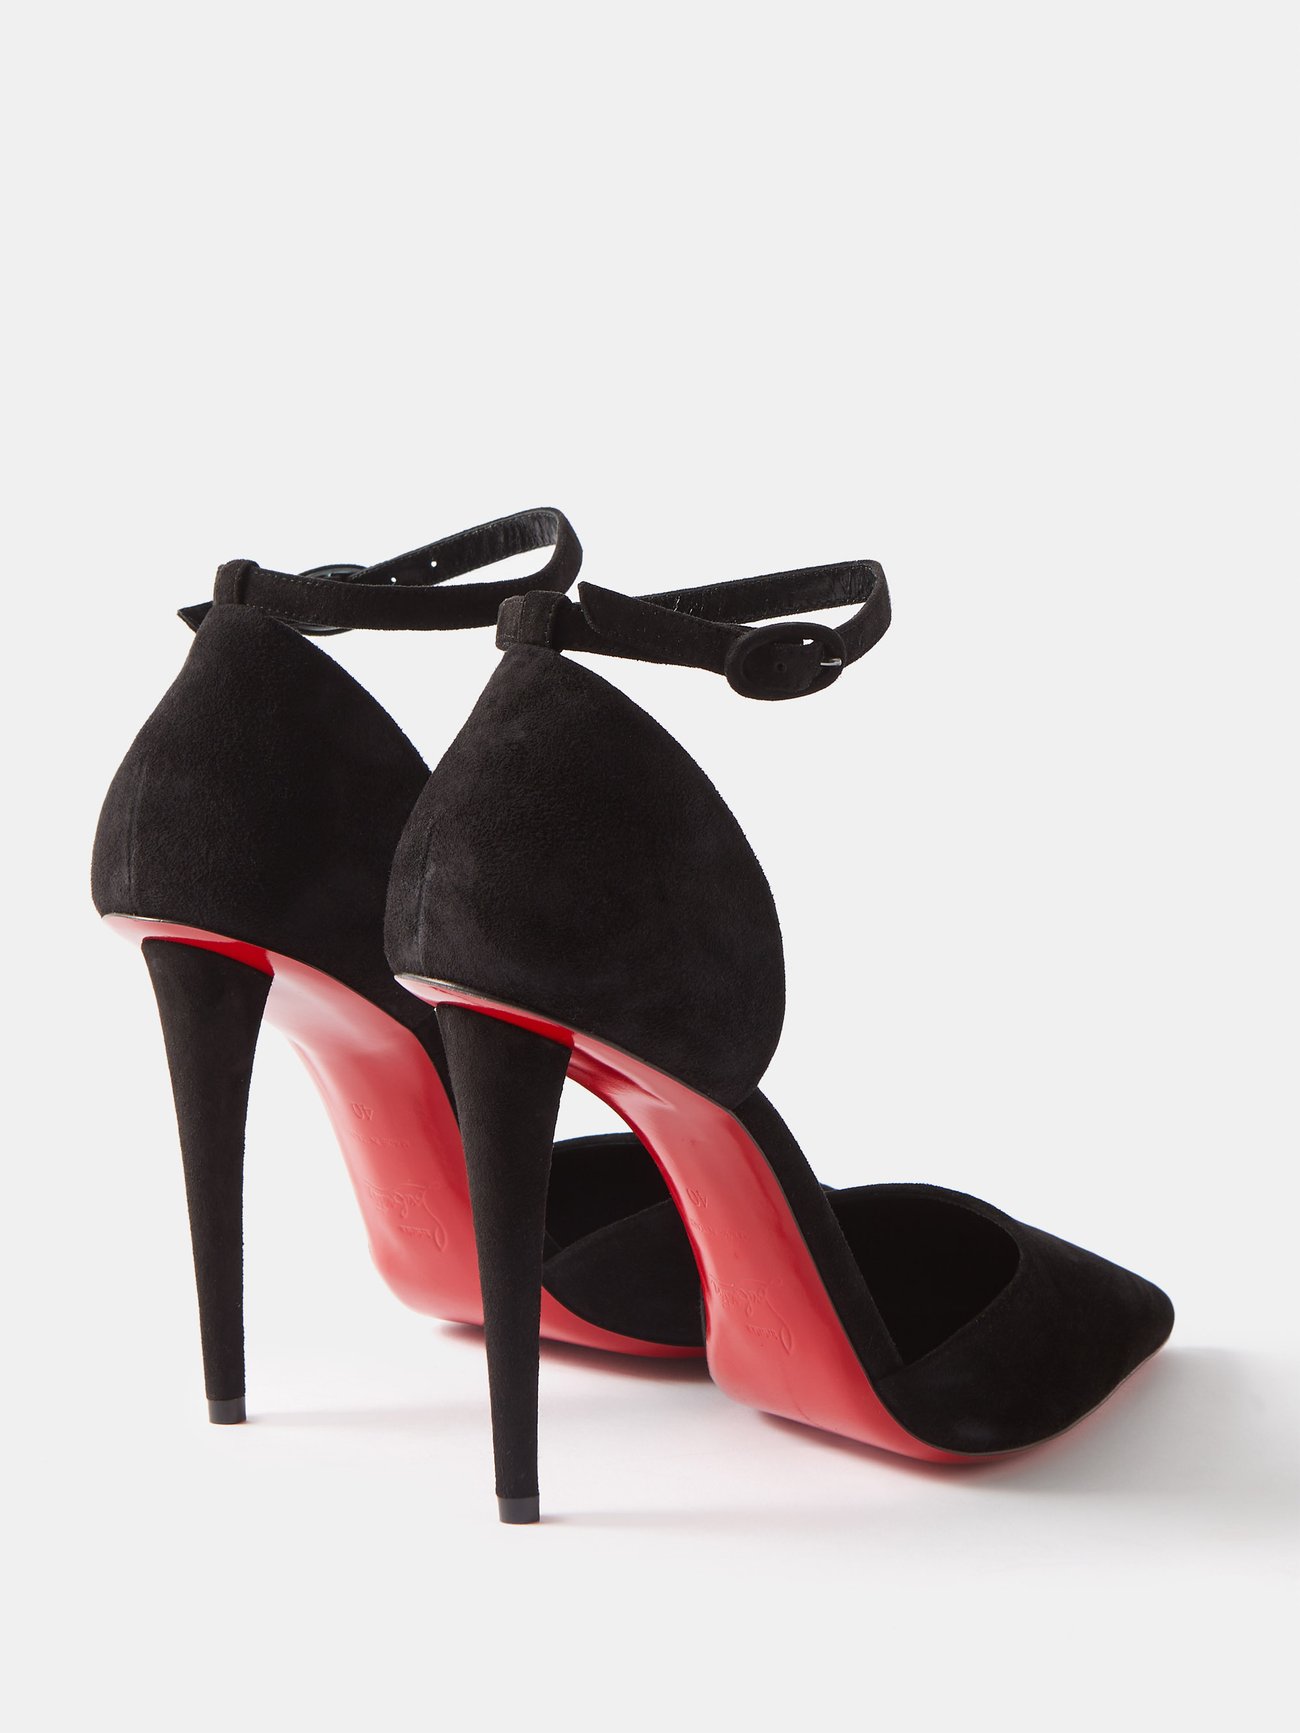 Christian Louboutin Black Leather Uptown Ankle Strap Pumps Size 38